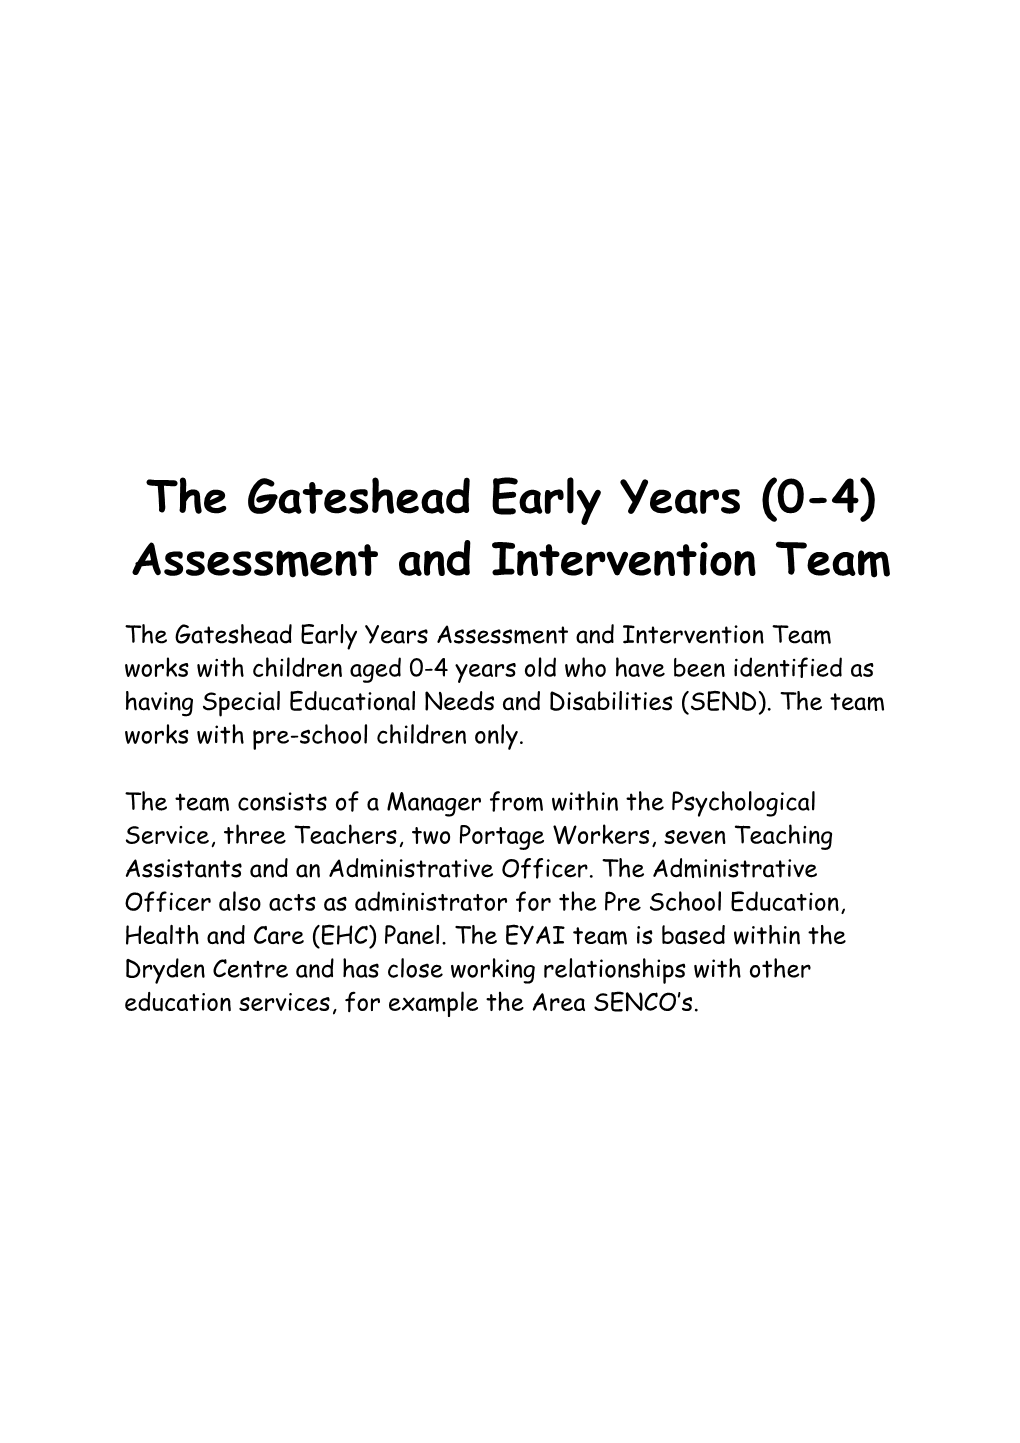 The Gateshead Early Years (0-4) Assessment and Intervention Team